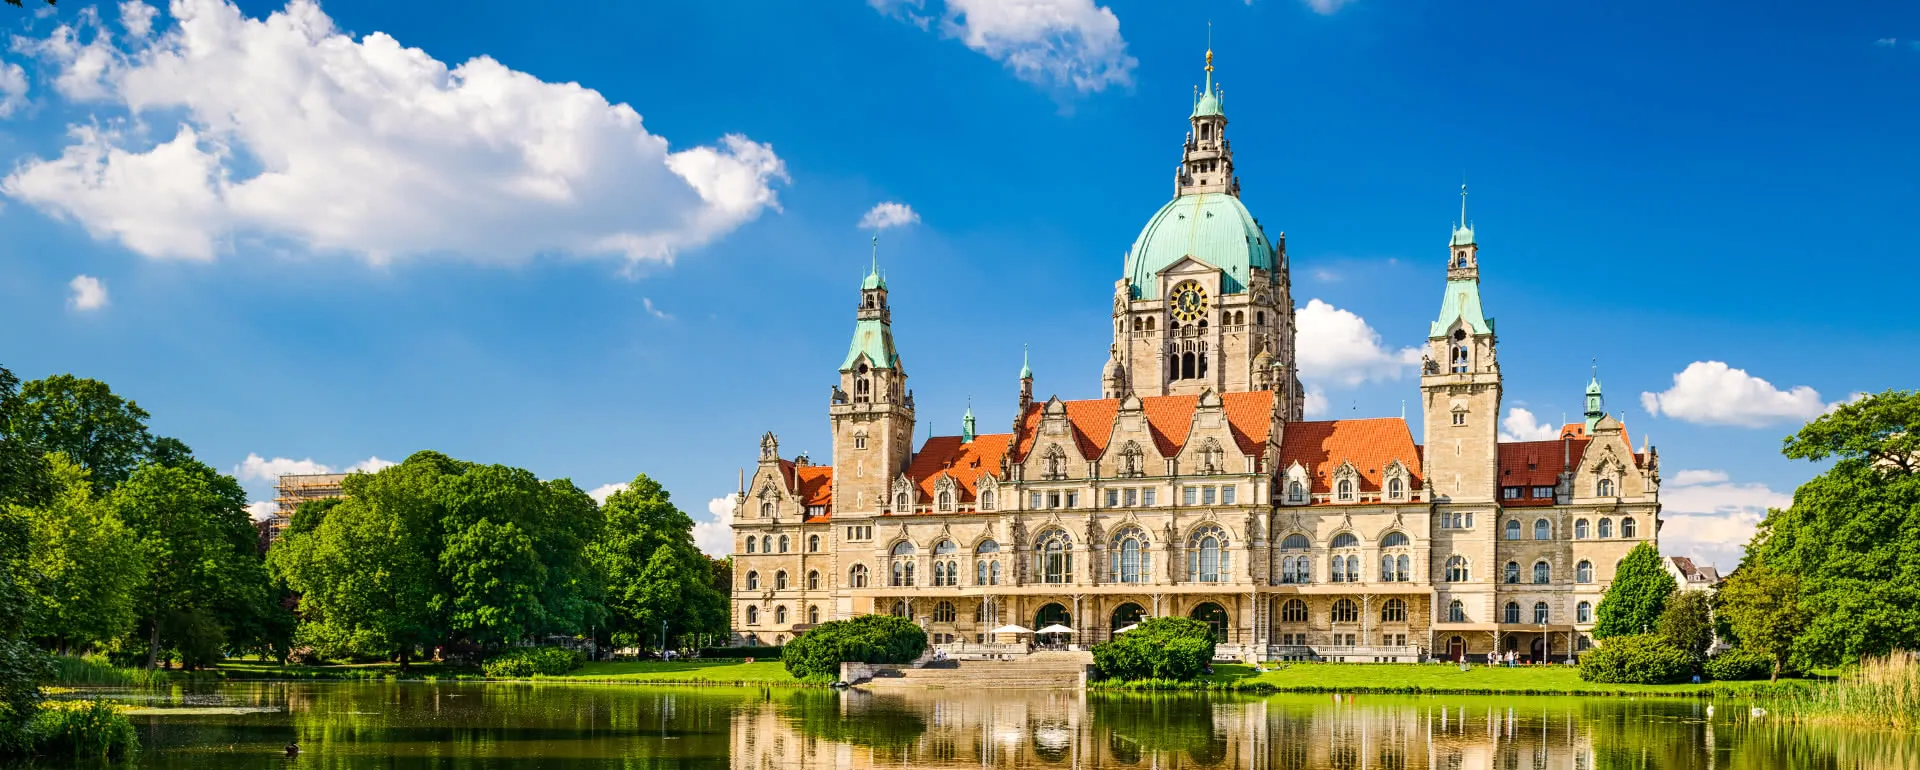 Hannover - the destination for company trips